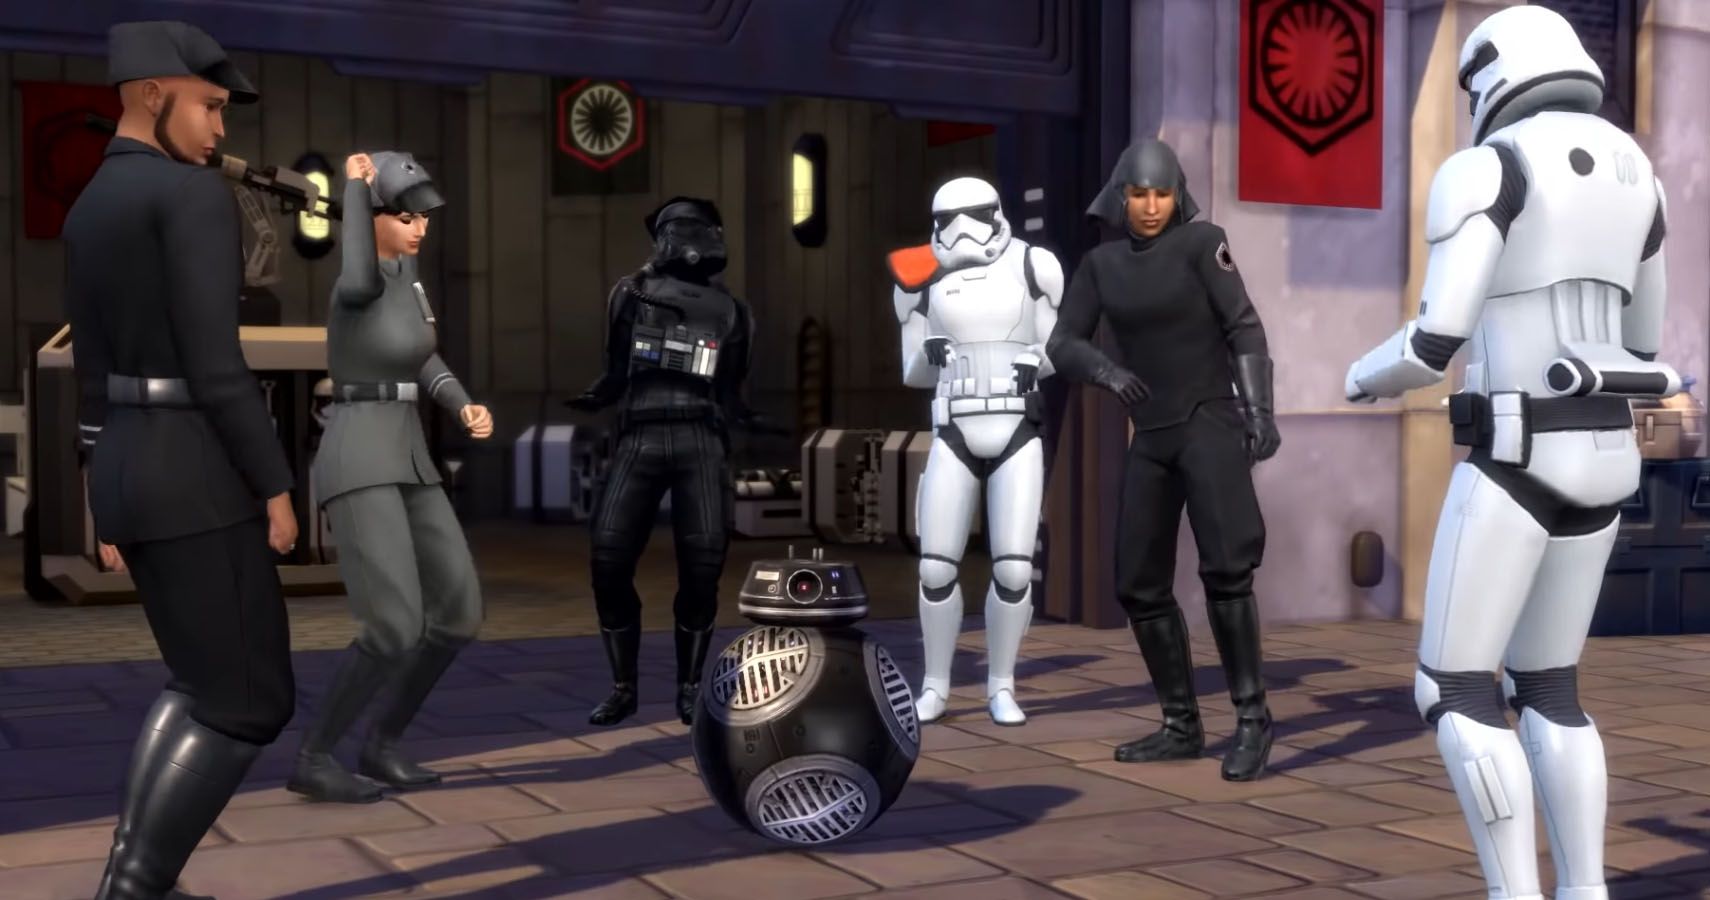 First Order offices and stormtroopers dancing to a droid's radio feature.